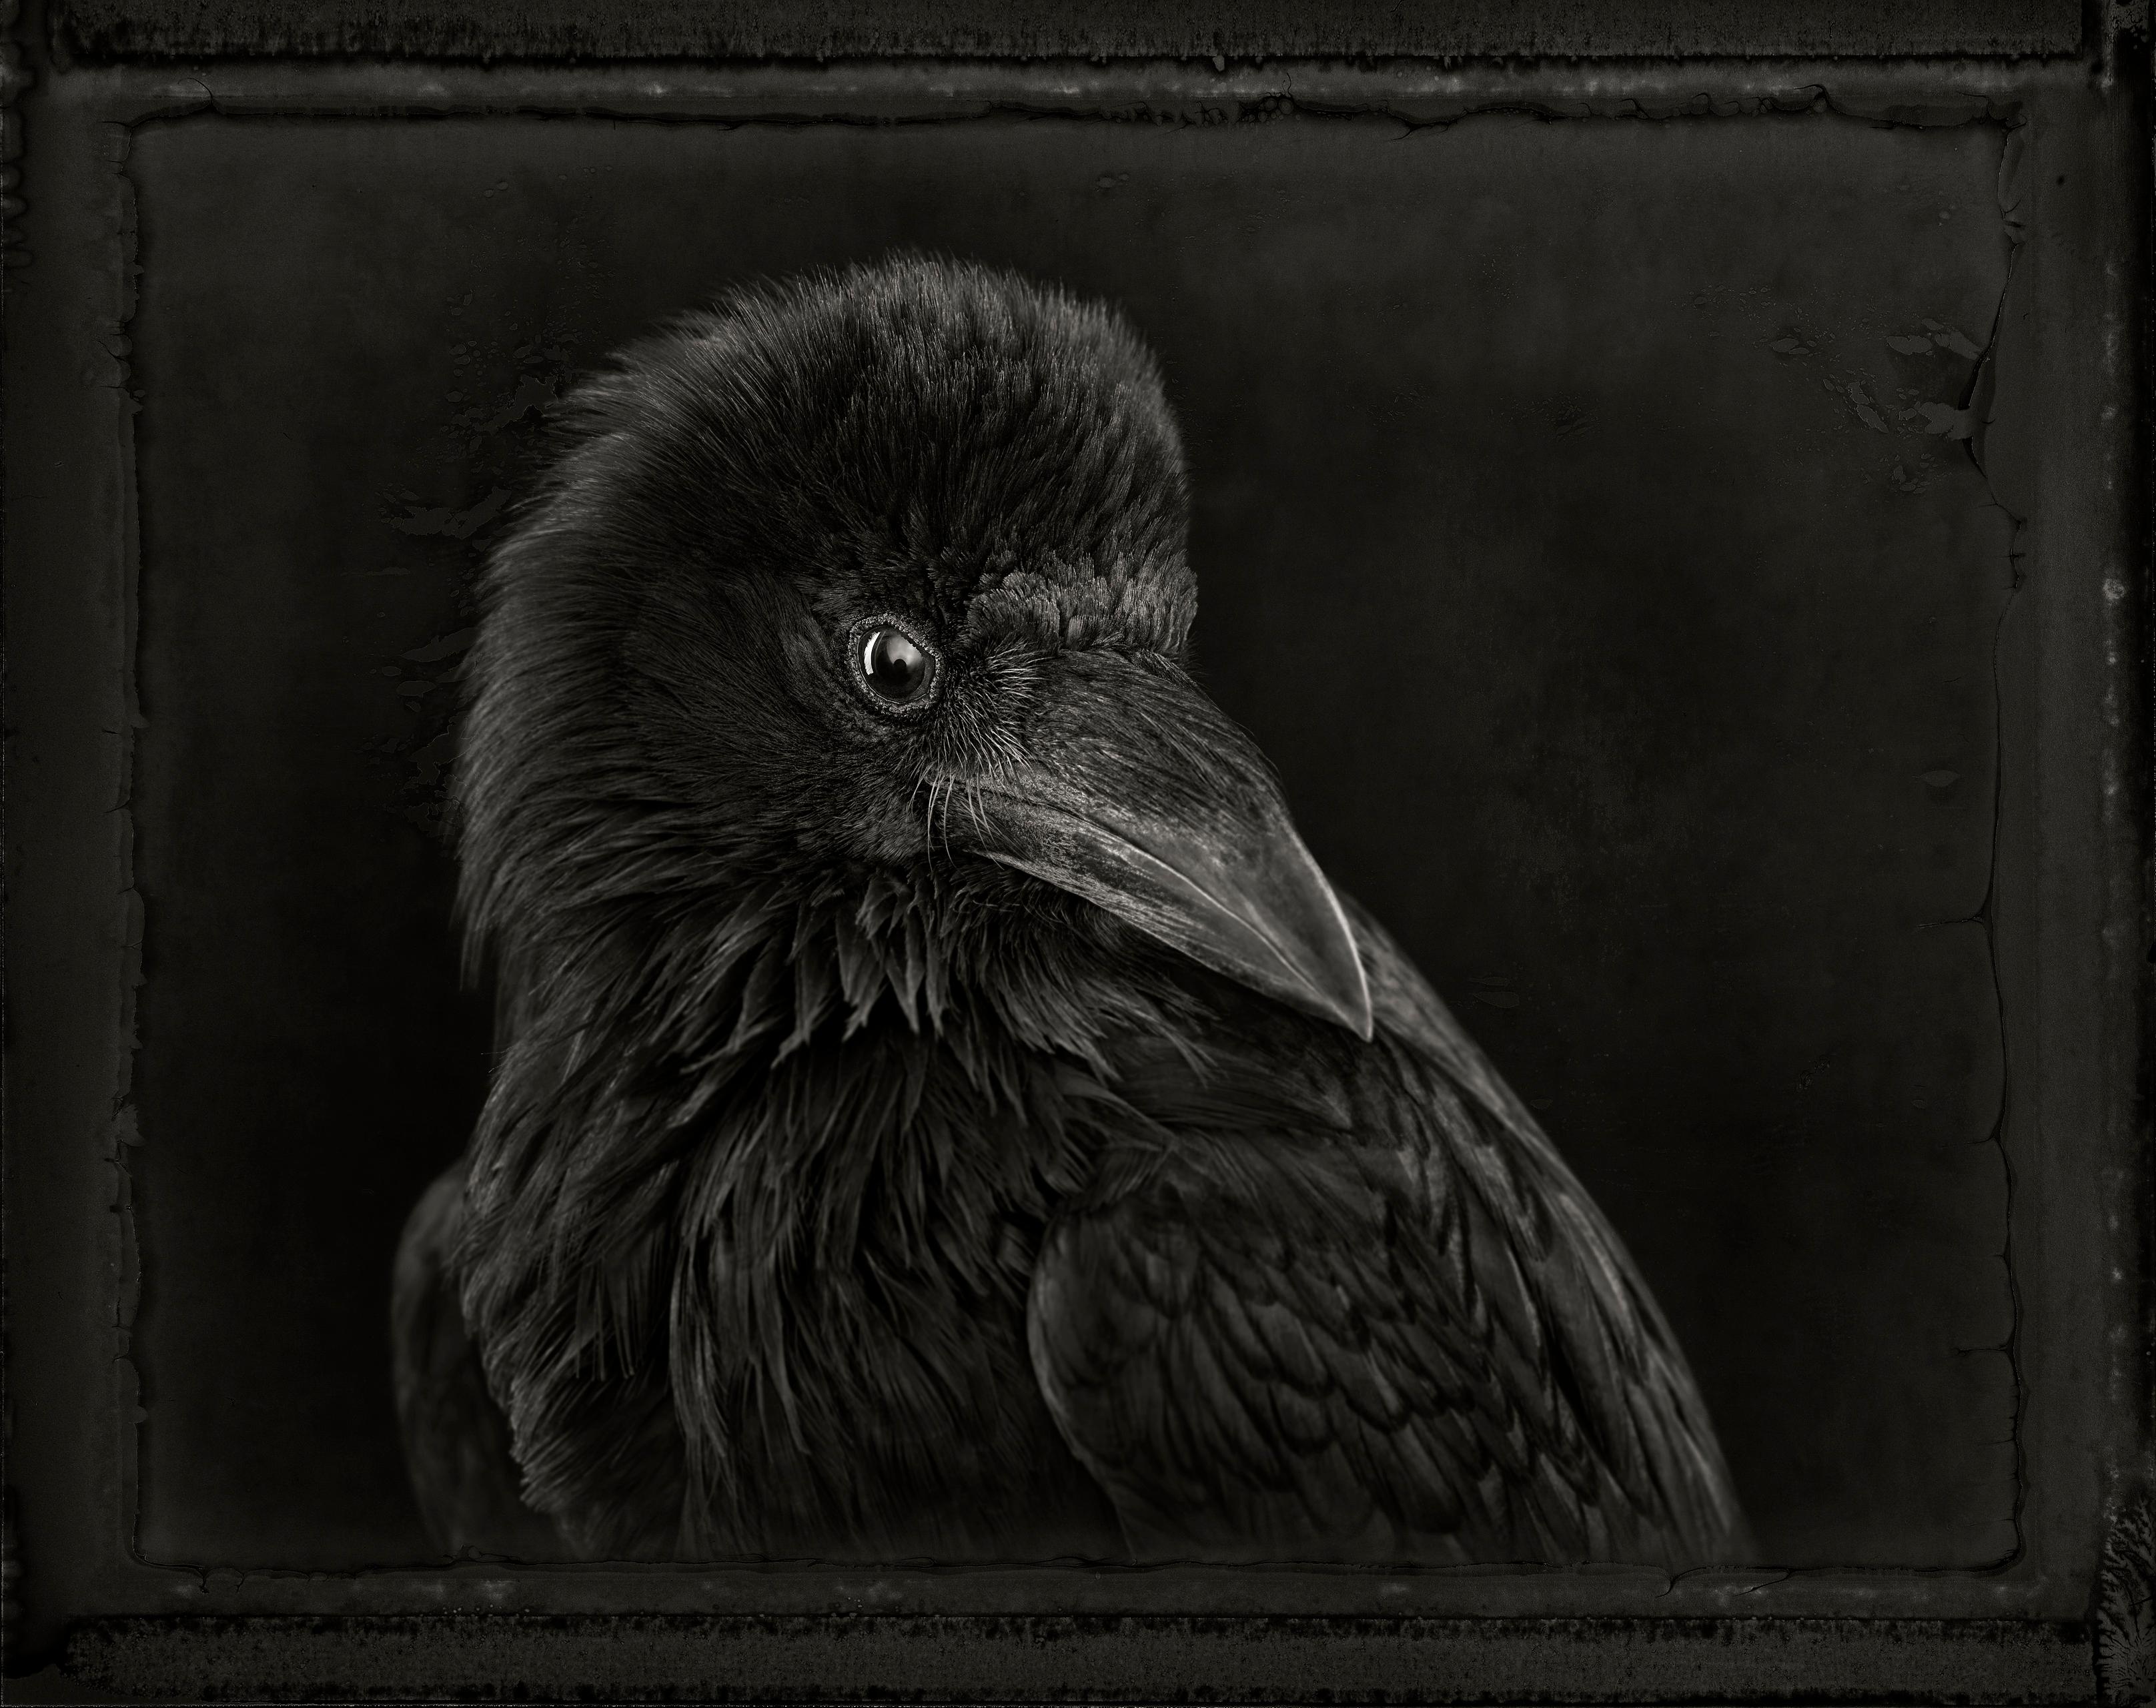 "Raven" is a signed photograph

For millions of years, early humans evolved alongside all other wildlife in a completely analog world, sharing the same natural environments in very similar ways. Although our paths diverged markedly around 12,000